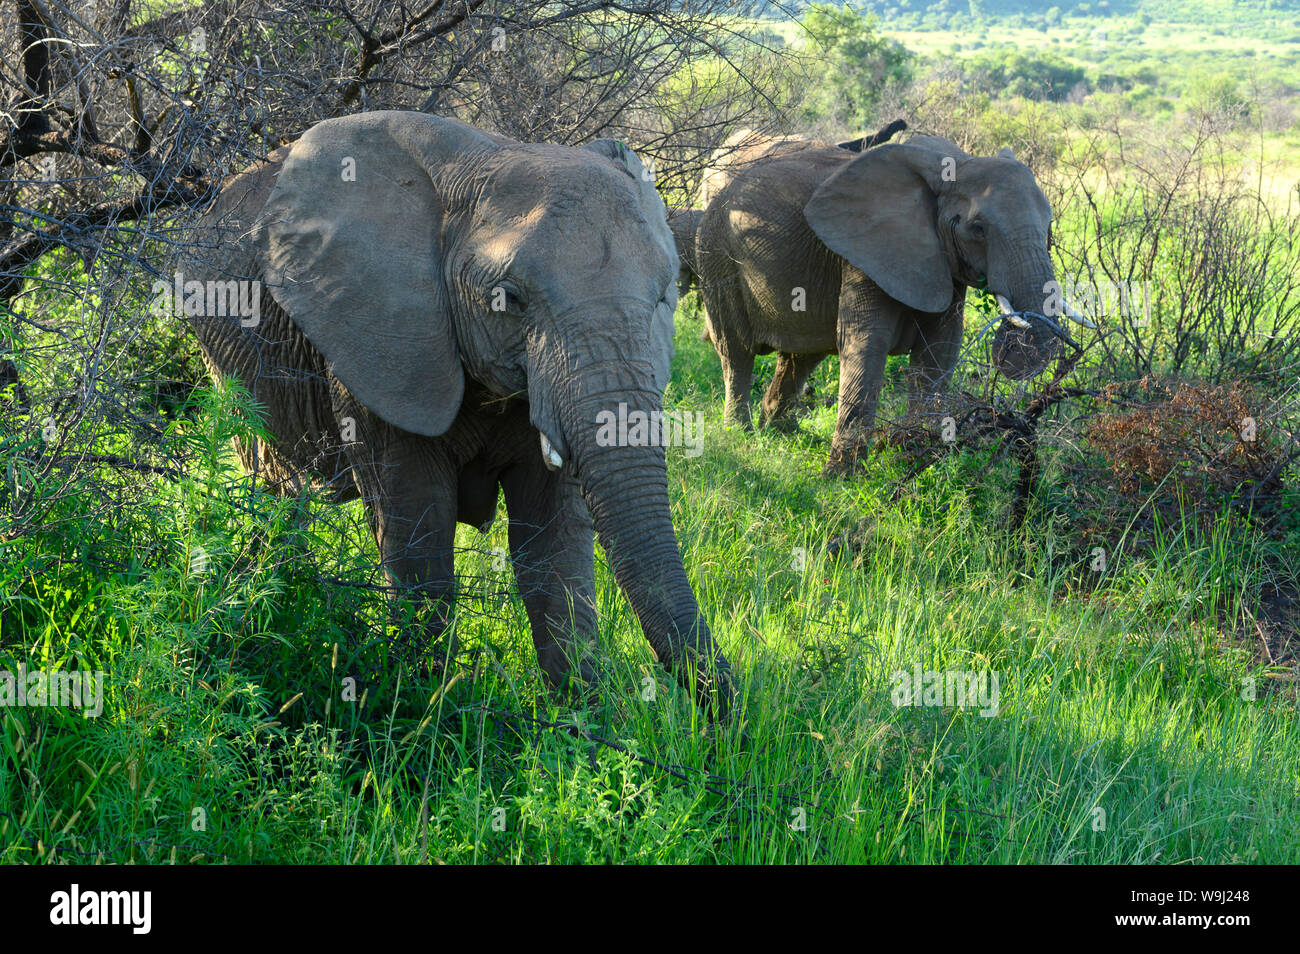 Africa, South Africa, African, Pilanesberg, National Park, elephant, 30074525 *** Local Caption ***  Africa, South Africa, African, Pilanesberg, Natio Stock Photo